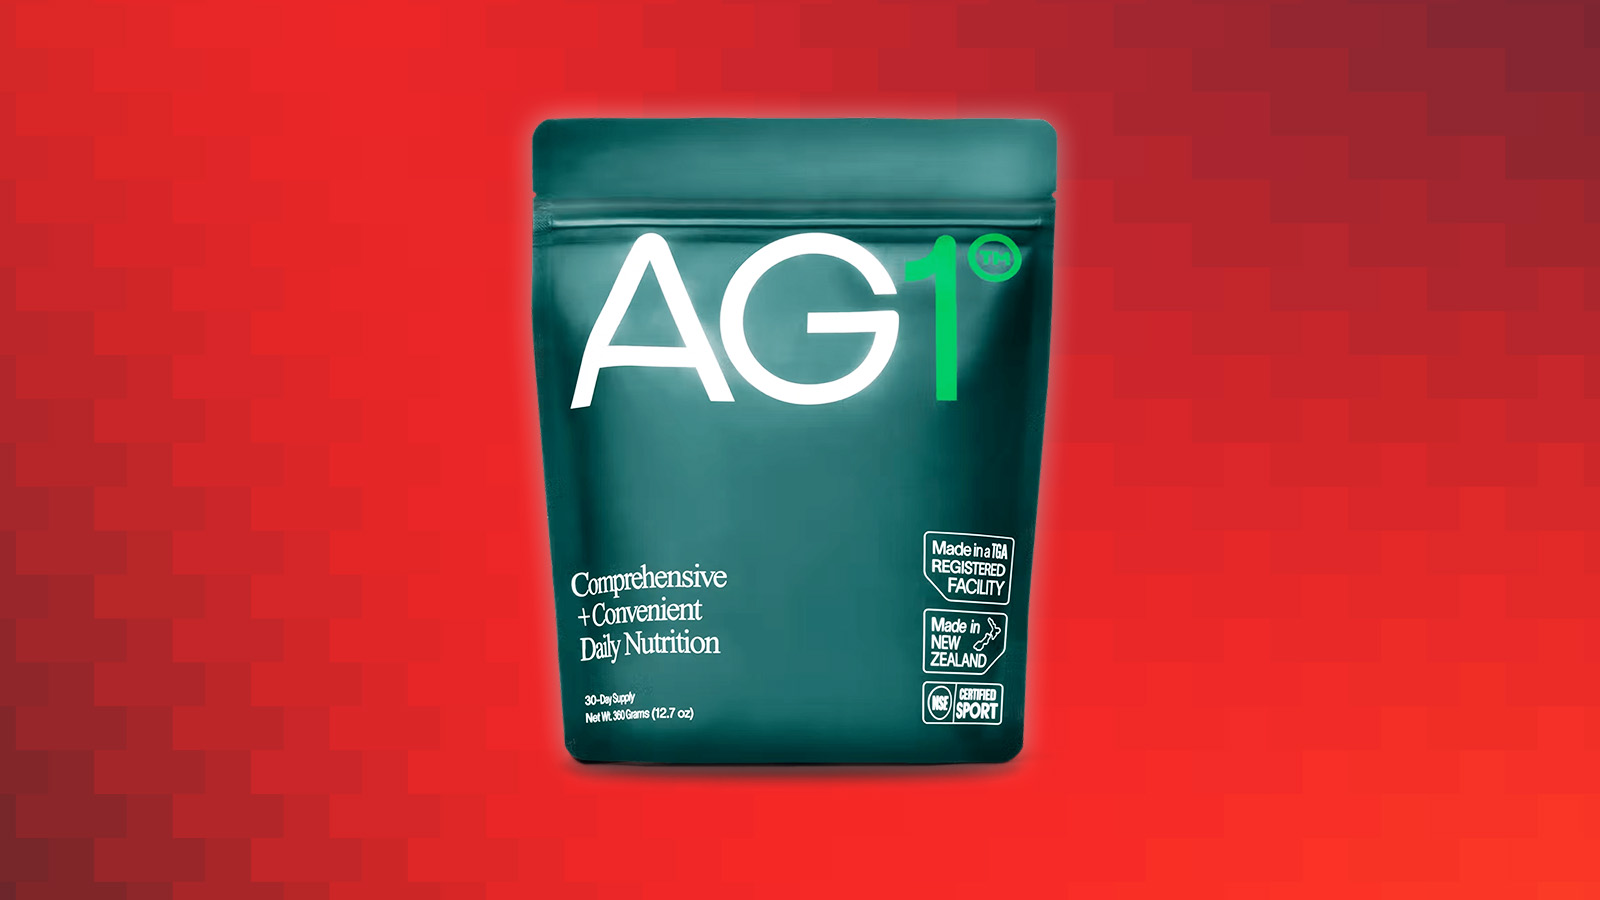 Athletic Greens Review  I Tried AG1 By Athletic Greens And This